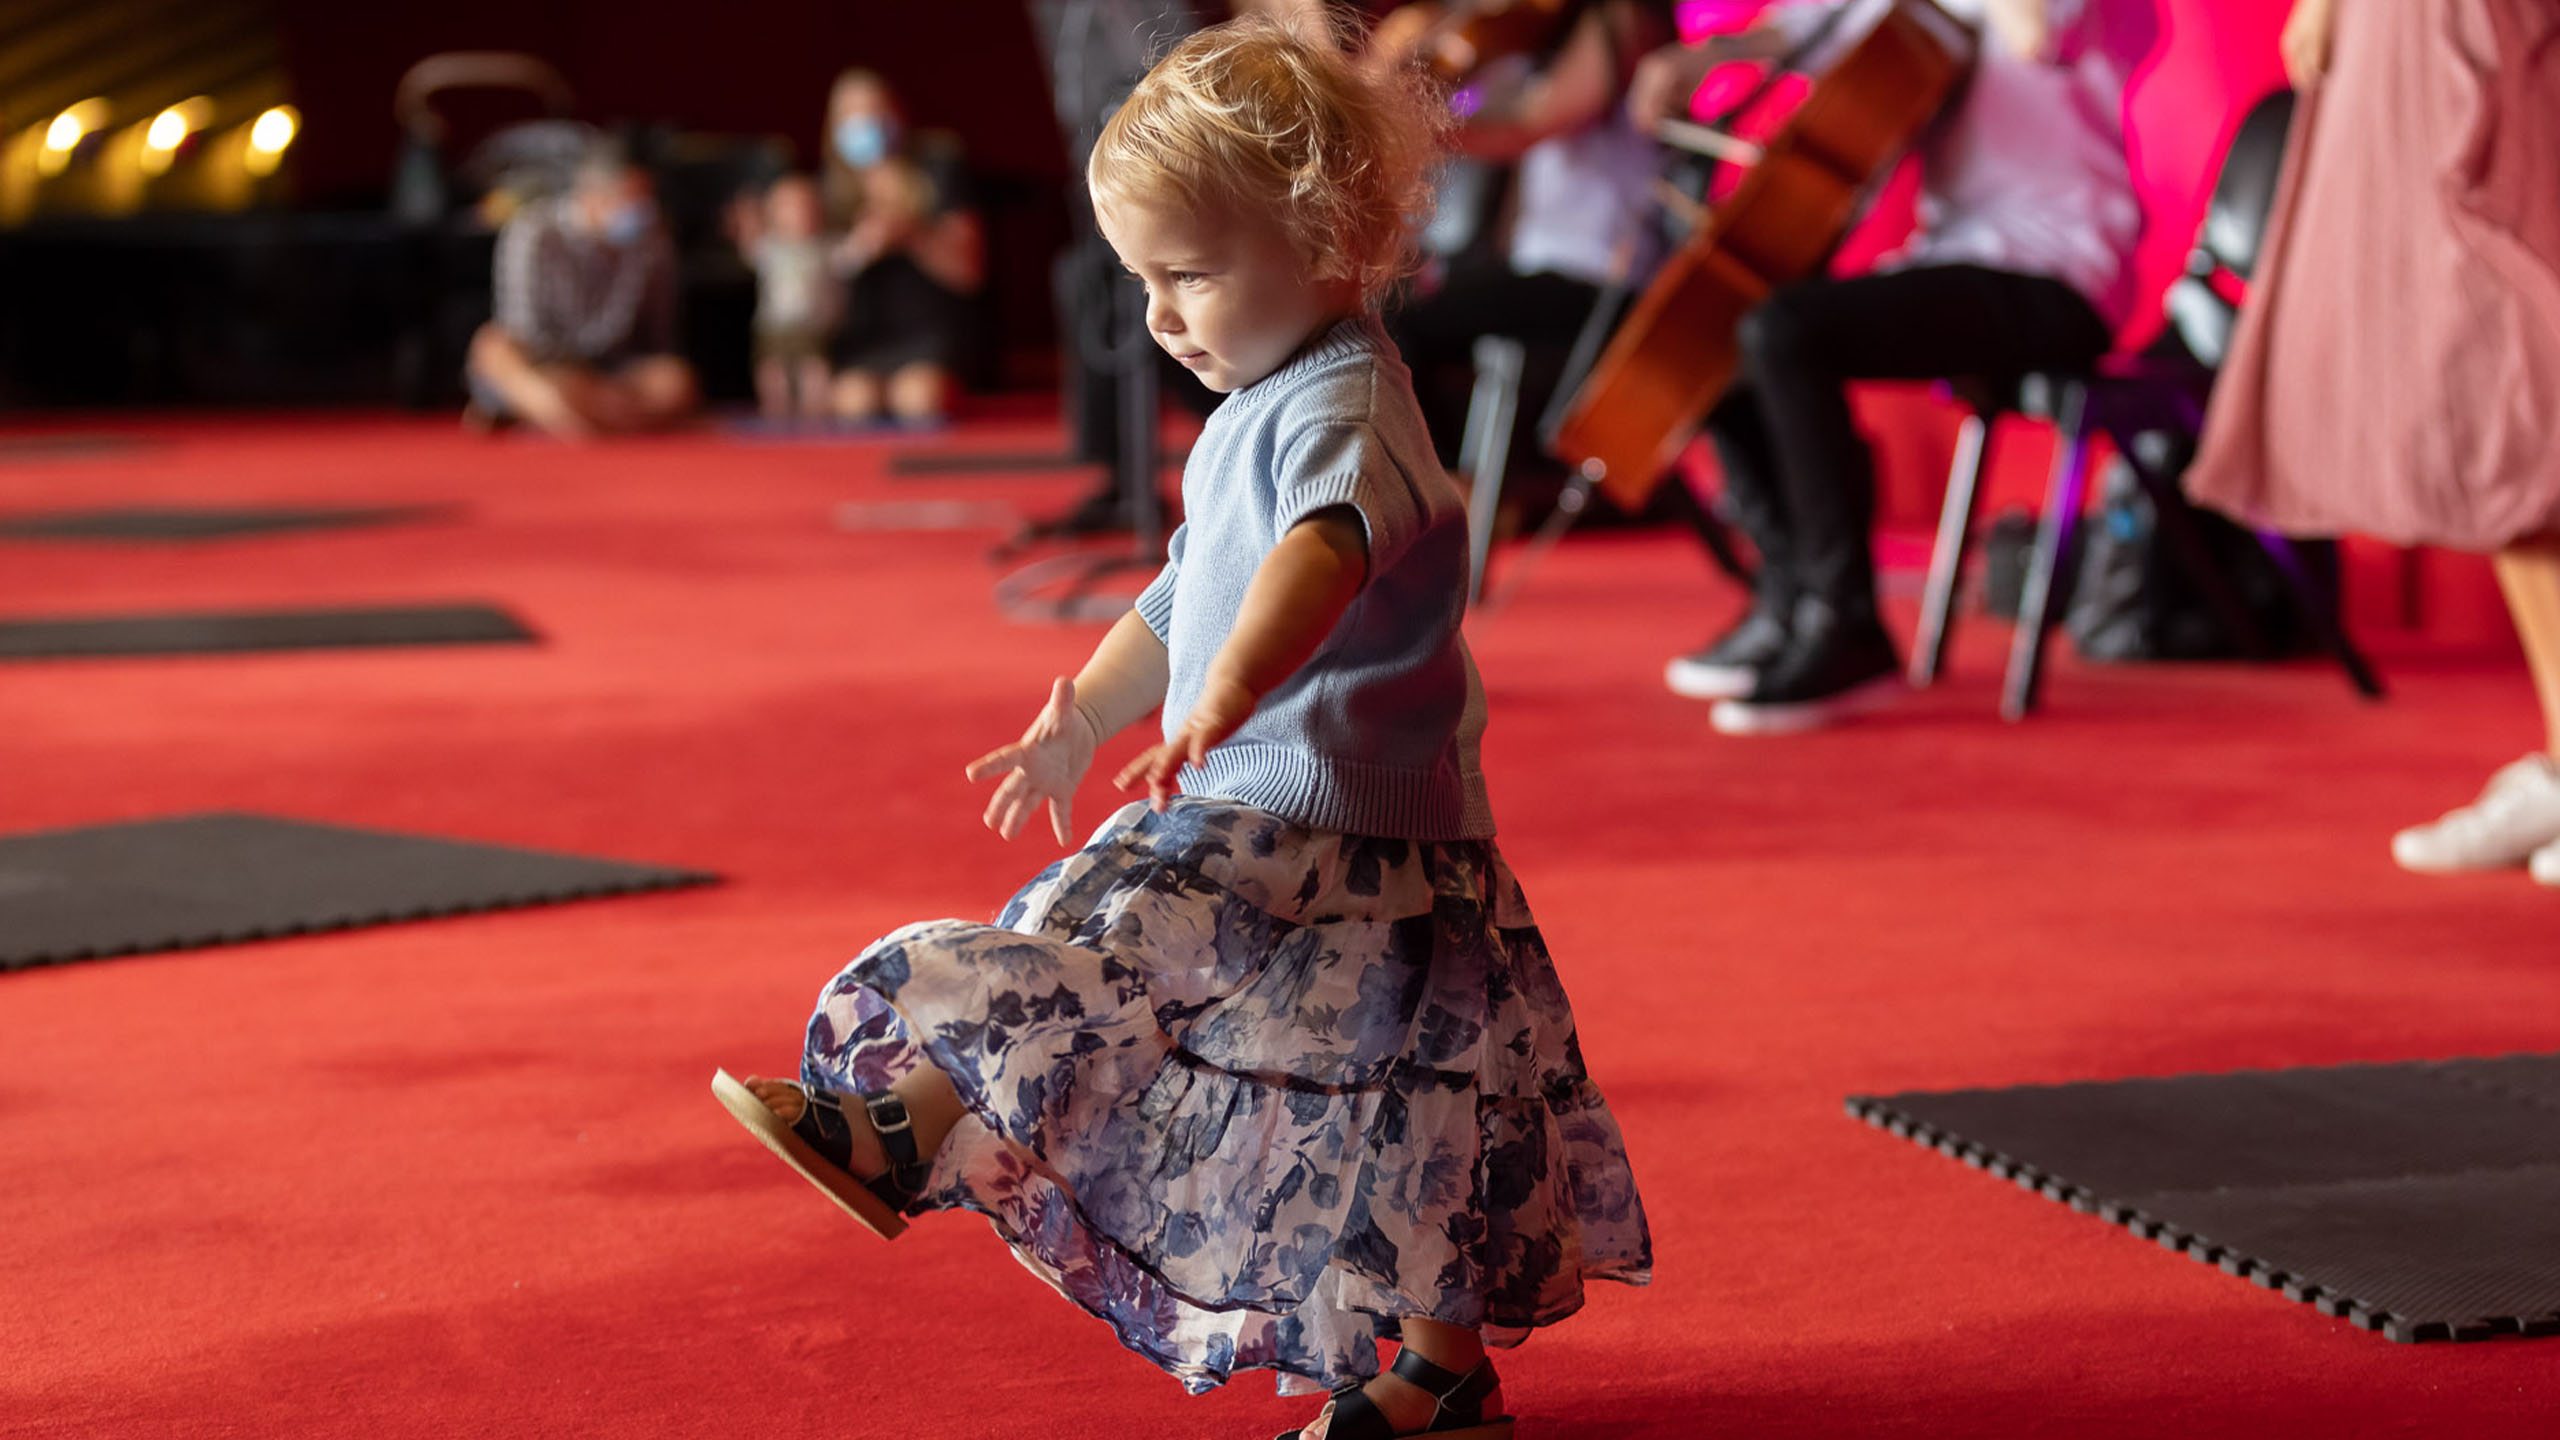 A toddler in a blue sweater and floral skirt dances on a red carpeted floor with people and musicians playing string instruments in the background.